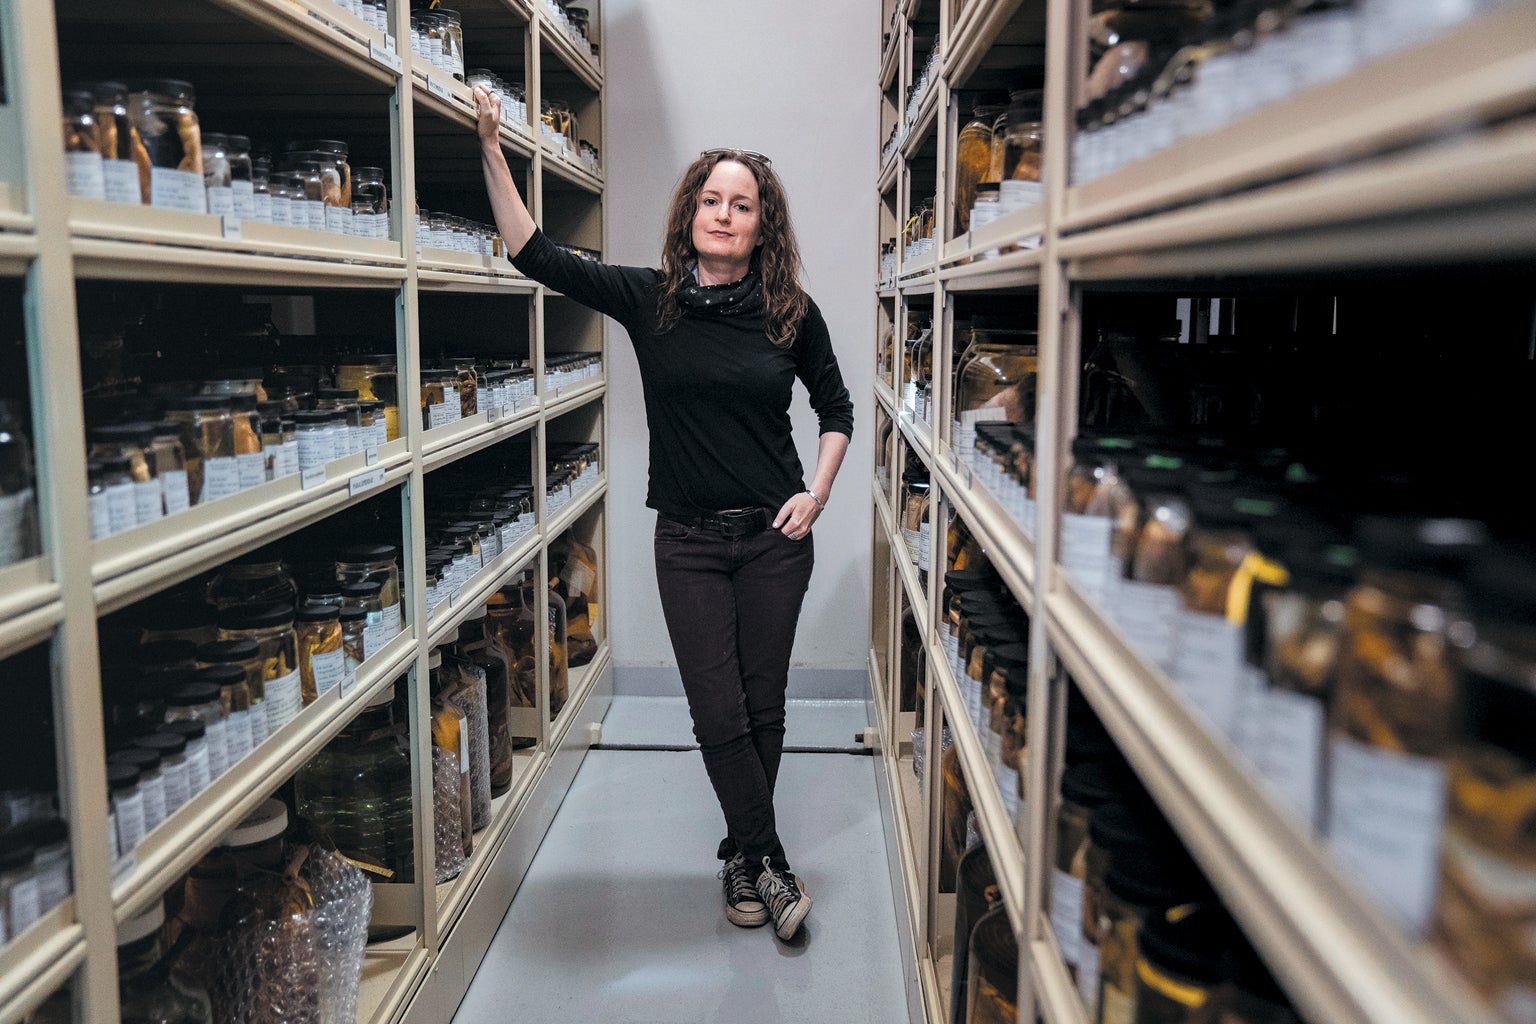 Parasite ecologist Chelsea Wood stands among the specimens at the University of Washington Fish Collection.